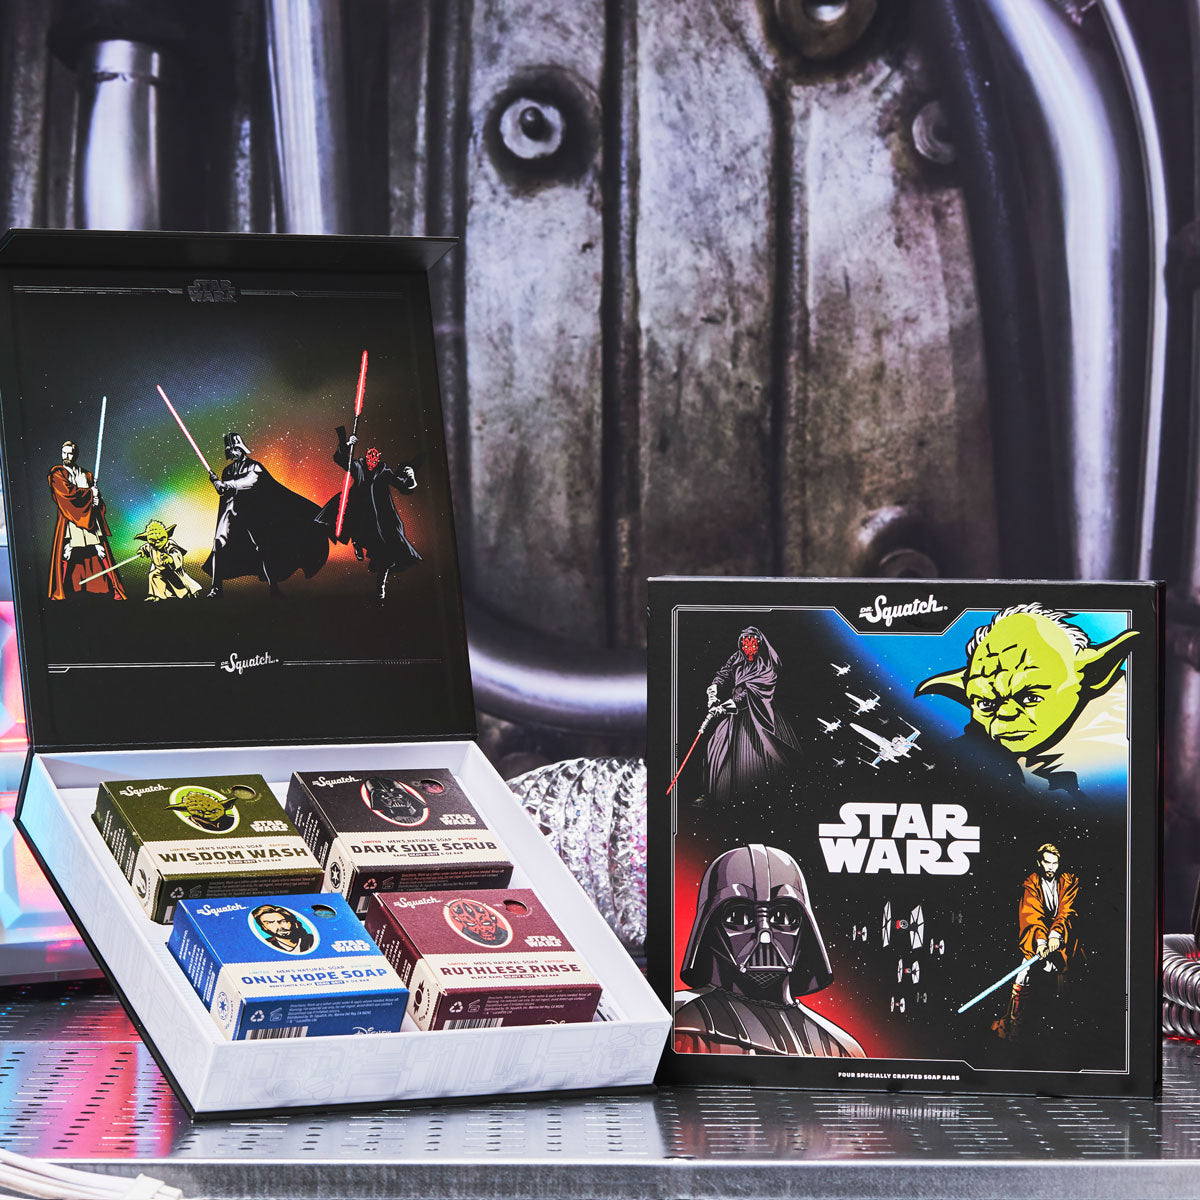 Dr. Squatch: RESTOCKED: The Dr. Squatch Soap - Star Wars Collection